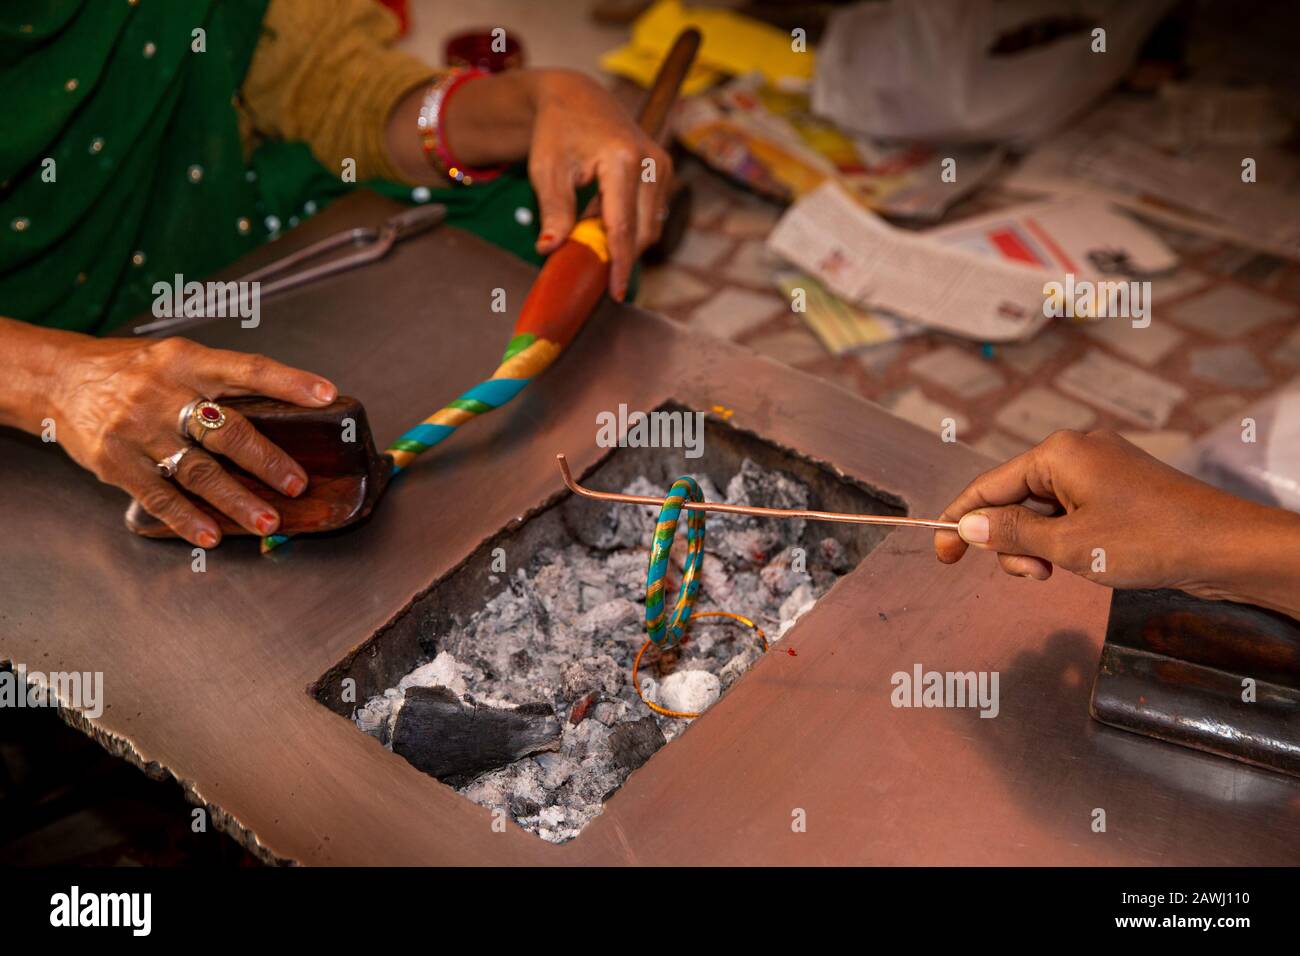 India, Rajasthan, Shekhawati, Nawalgarh, making traditional lac bangles by hand, twisting to form spiral pattern, gold and blue colour bangle, whilst Stock Photo